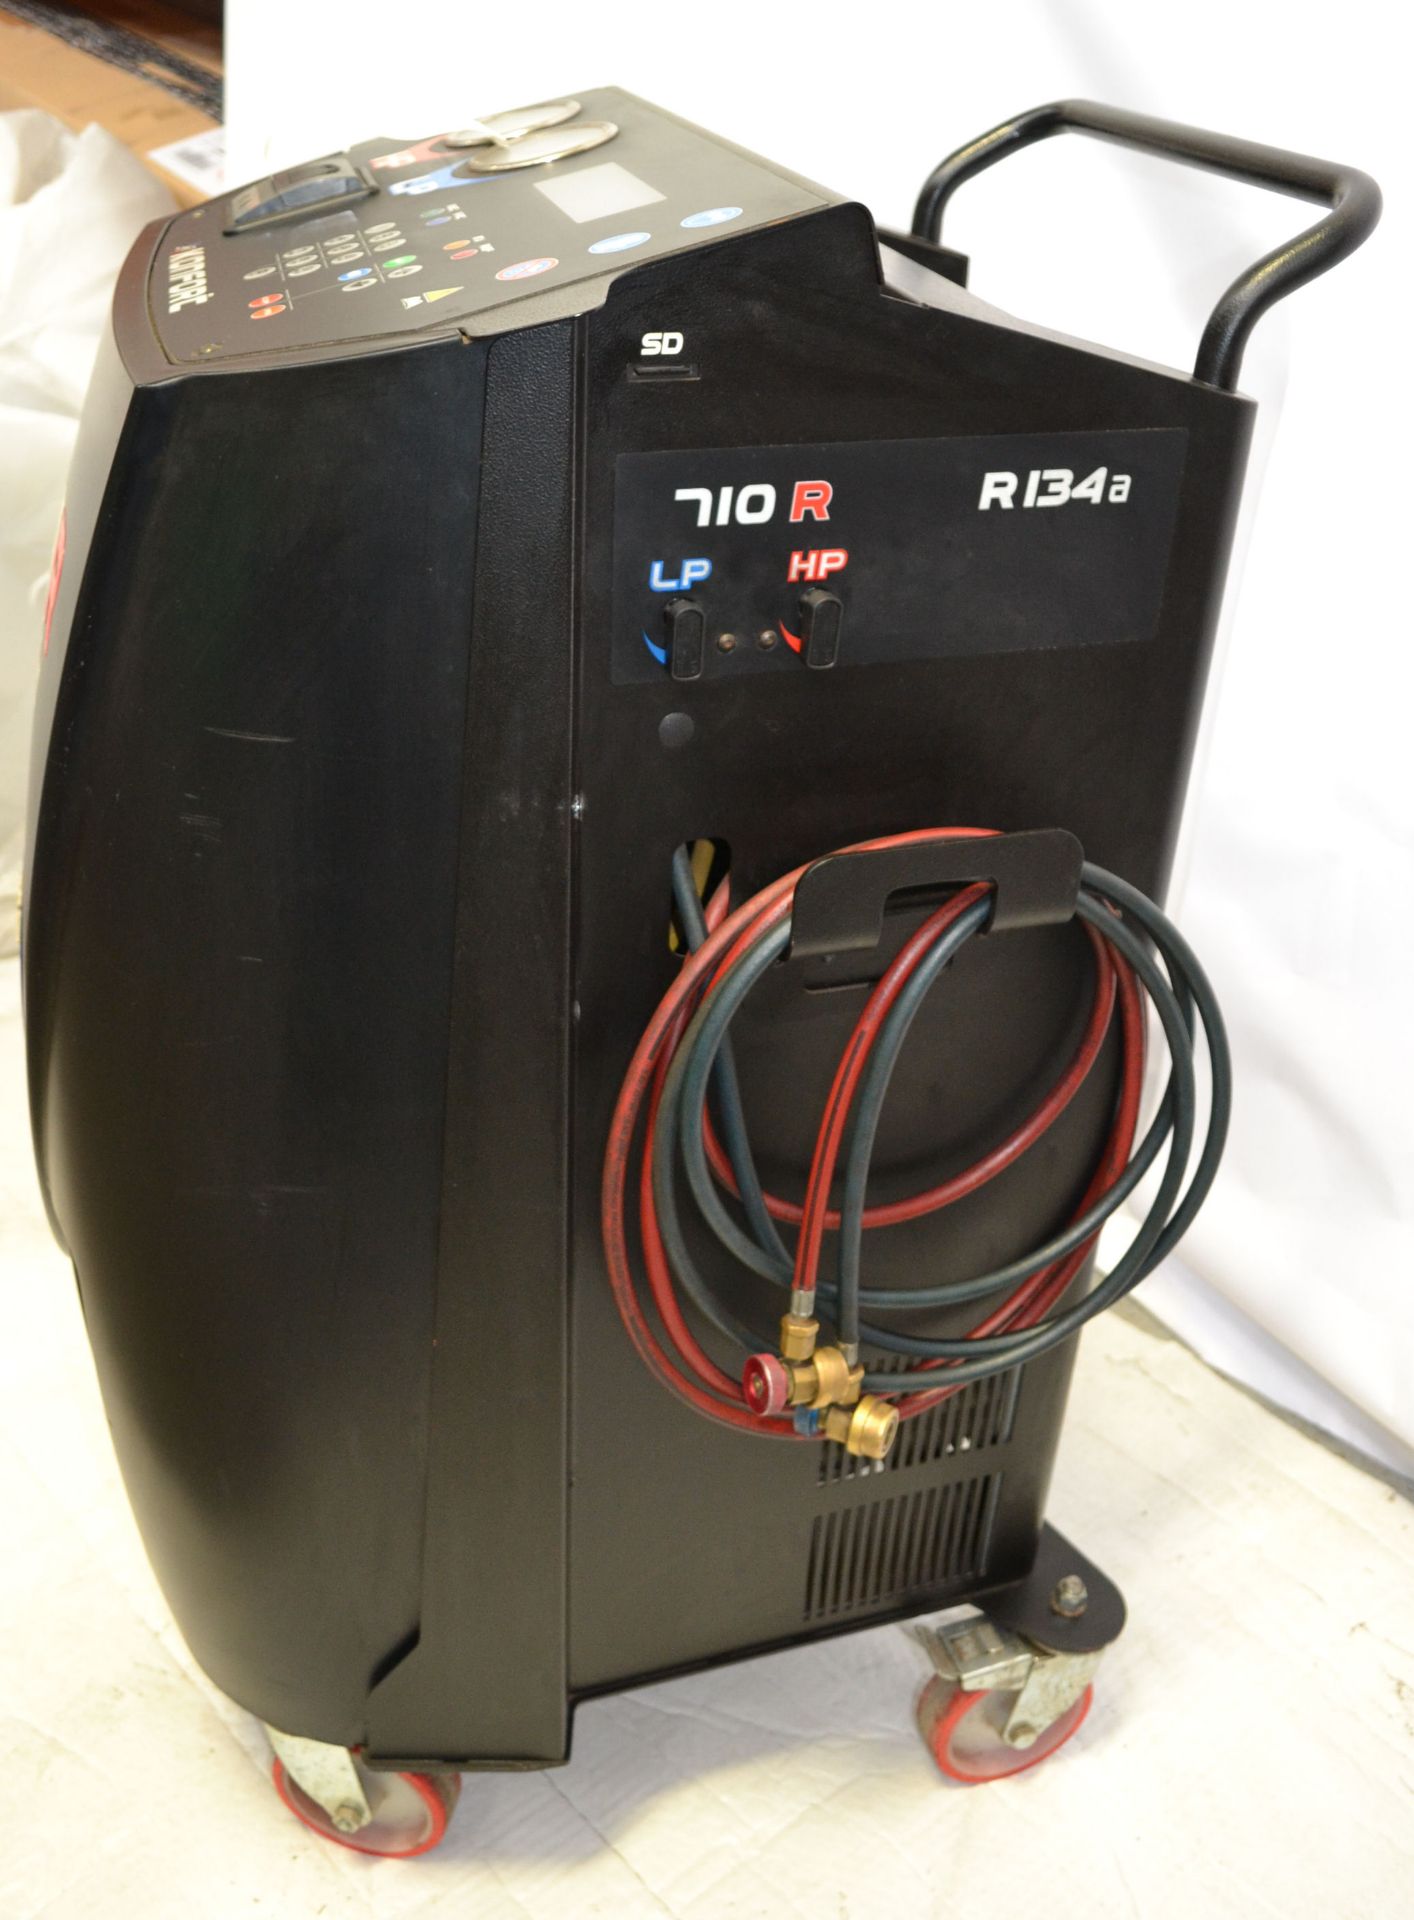 1 x Texa Konfort 710R Air Con AC Servicing Machine for R134a - Excellent Condition - Year of - Image 5 of 24